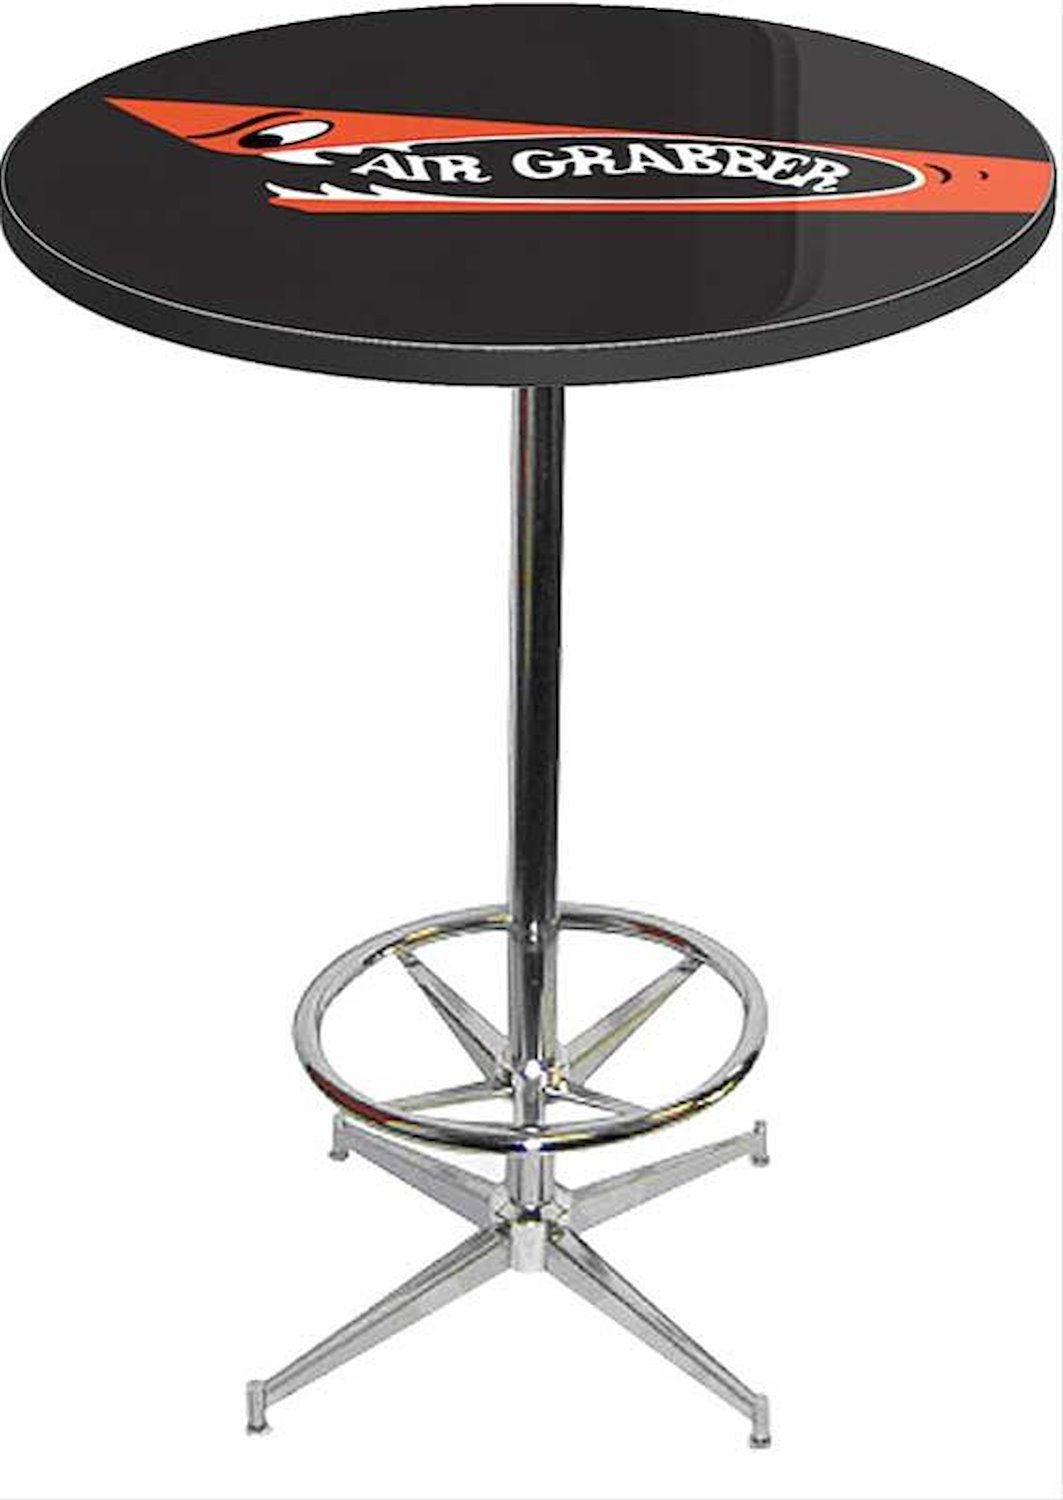 MD673114 Pub Table With Chrome Base And Foot Rest Mopar Air Grabber Logo Pub Table With Chrome Base And Foot Rest